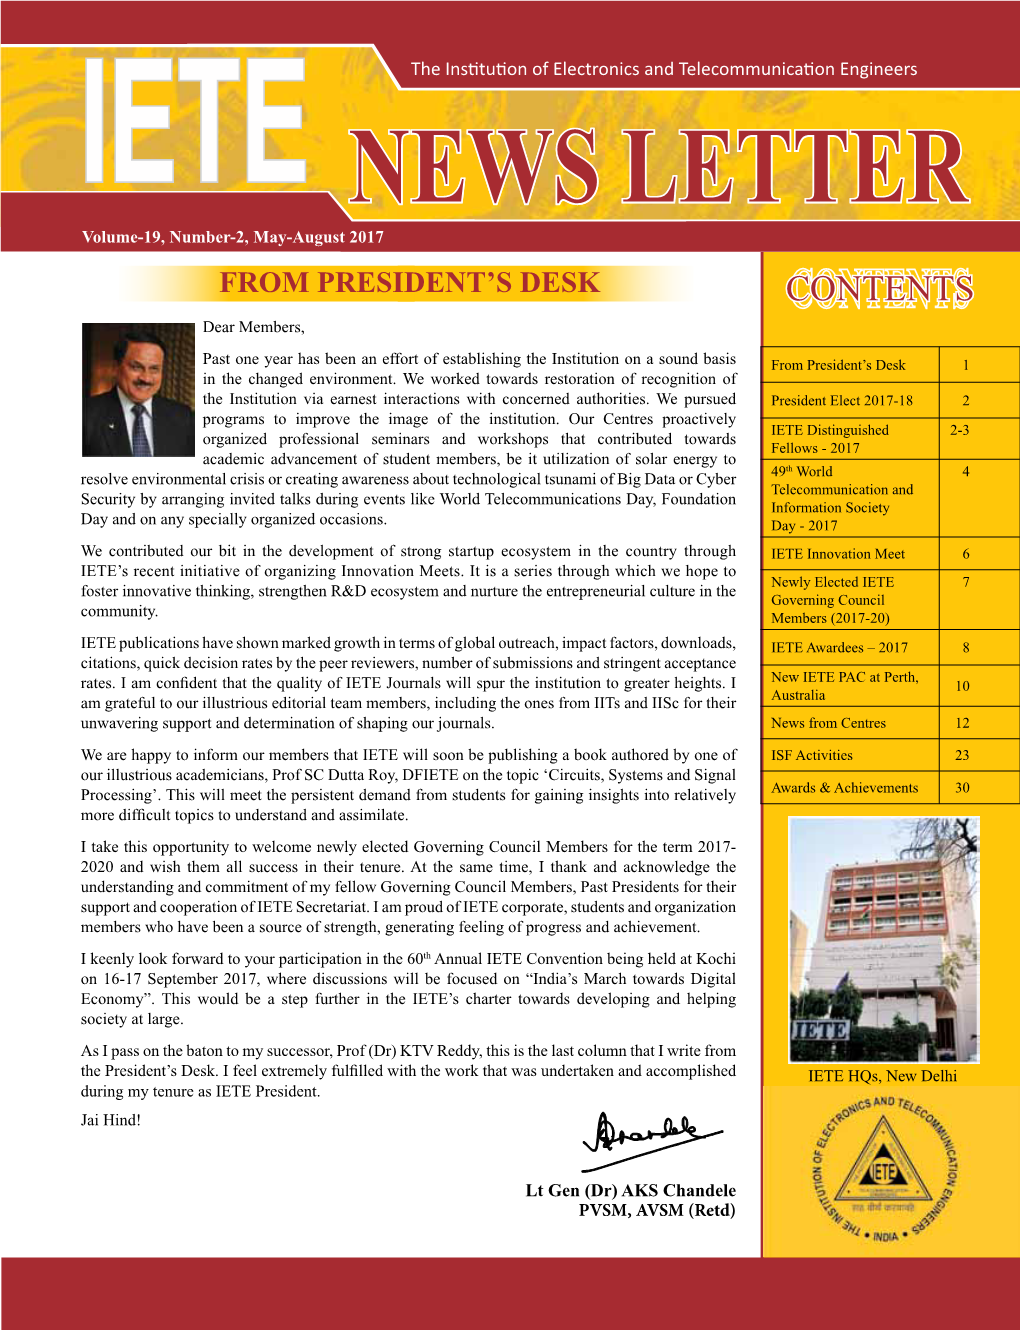 IETE News Letter Volume-19, Number-2, May-August 2017 from President’S Desk Contents Dear Members